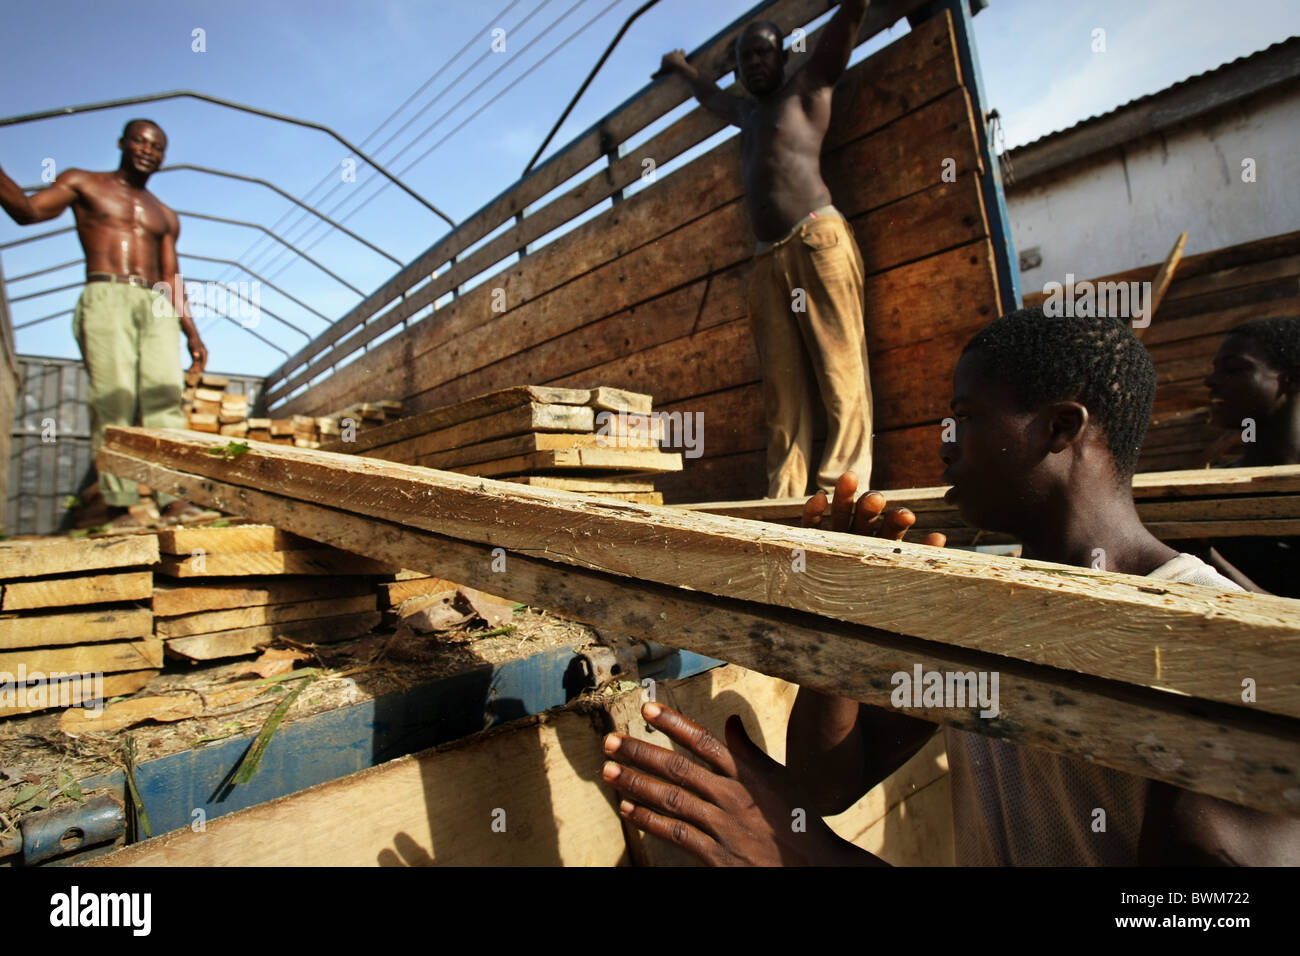 Men unload wooden boards from a truck at the timber market in Tema, Ghana on Tuesday May 20, 2008. Stock Photo